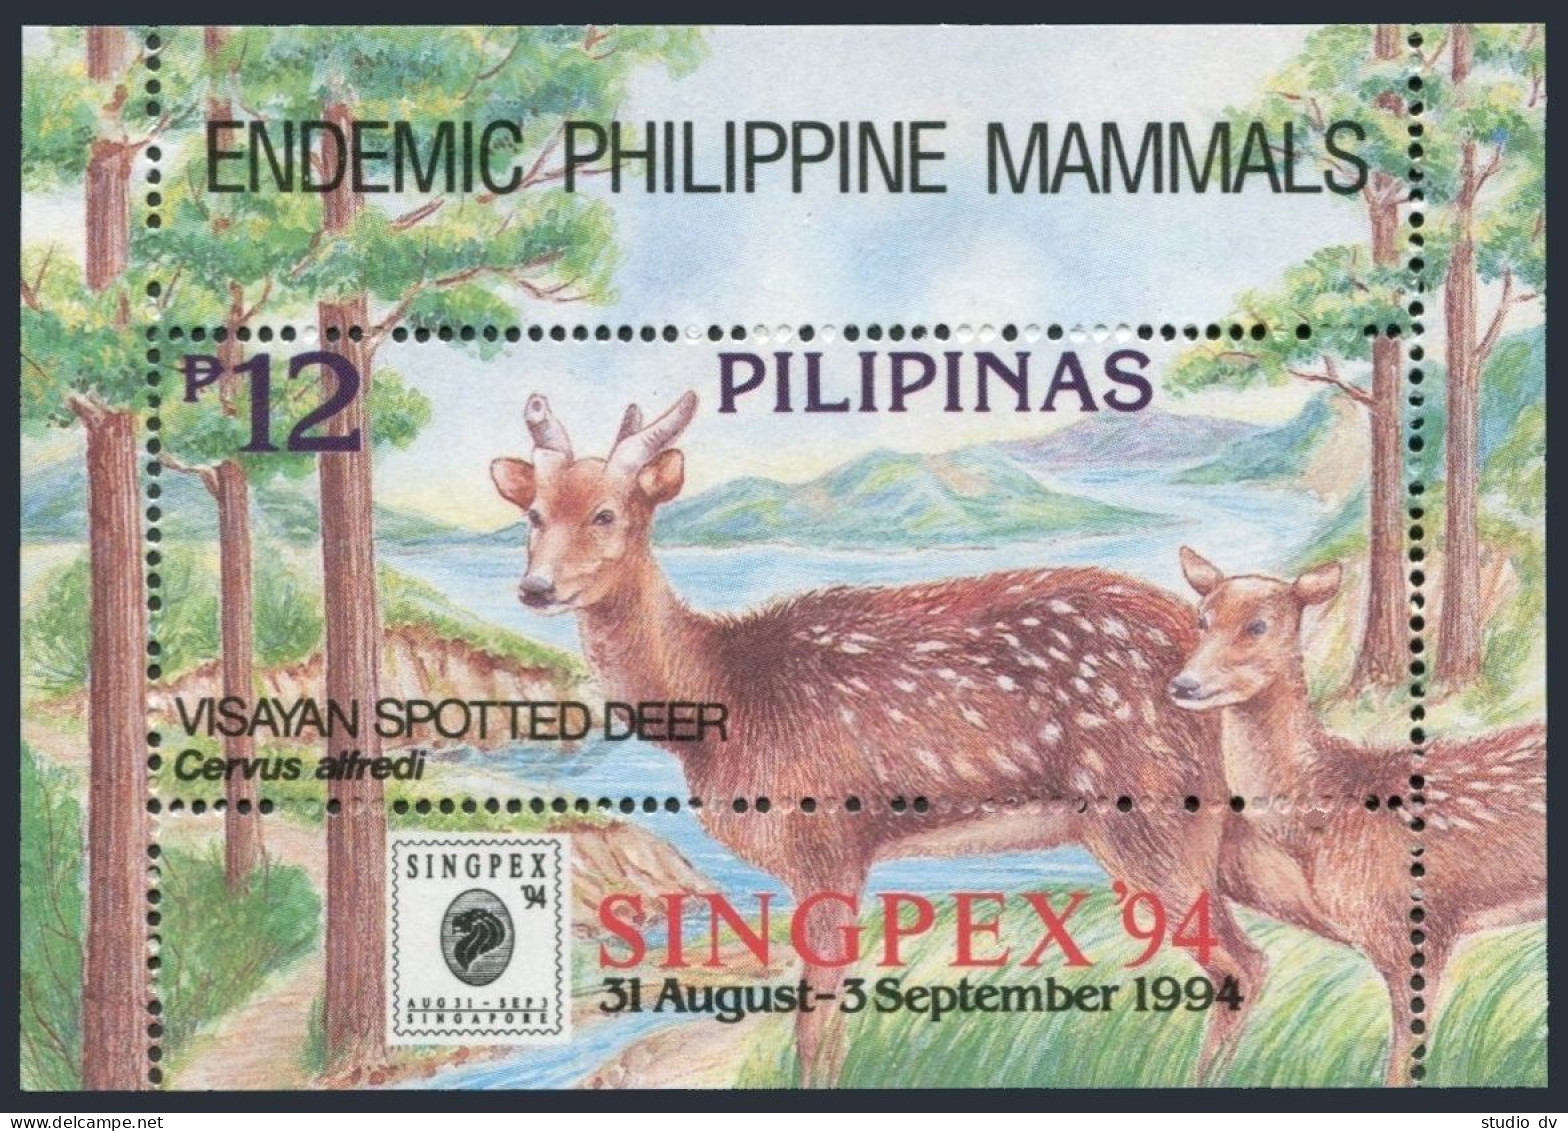 Philippines 2312a, MNH. Michel 2436 Bl.76. SINGPEX-1994. Visayan Spotted Deer. - Philippines